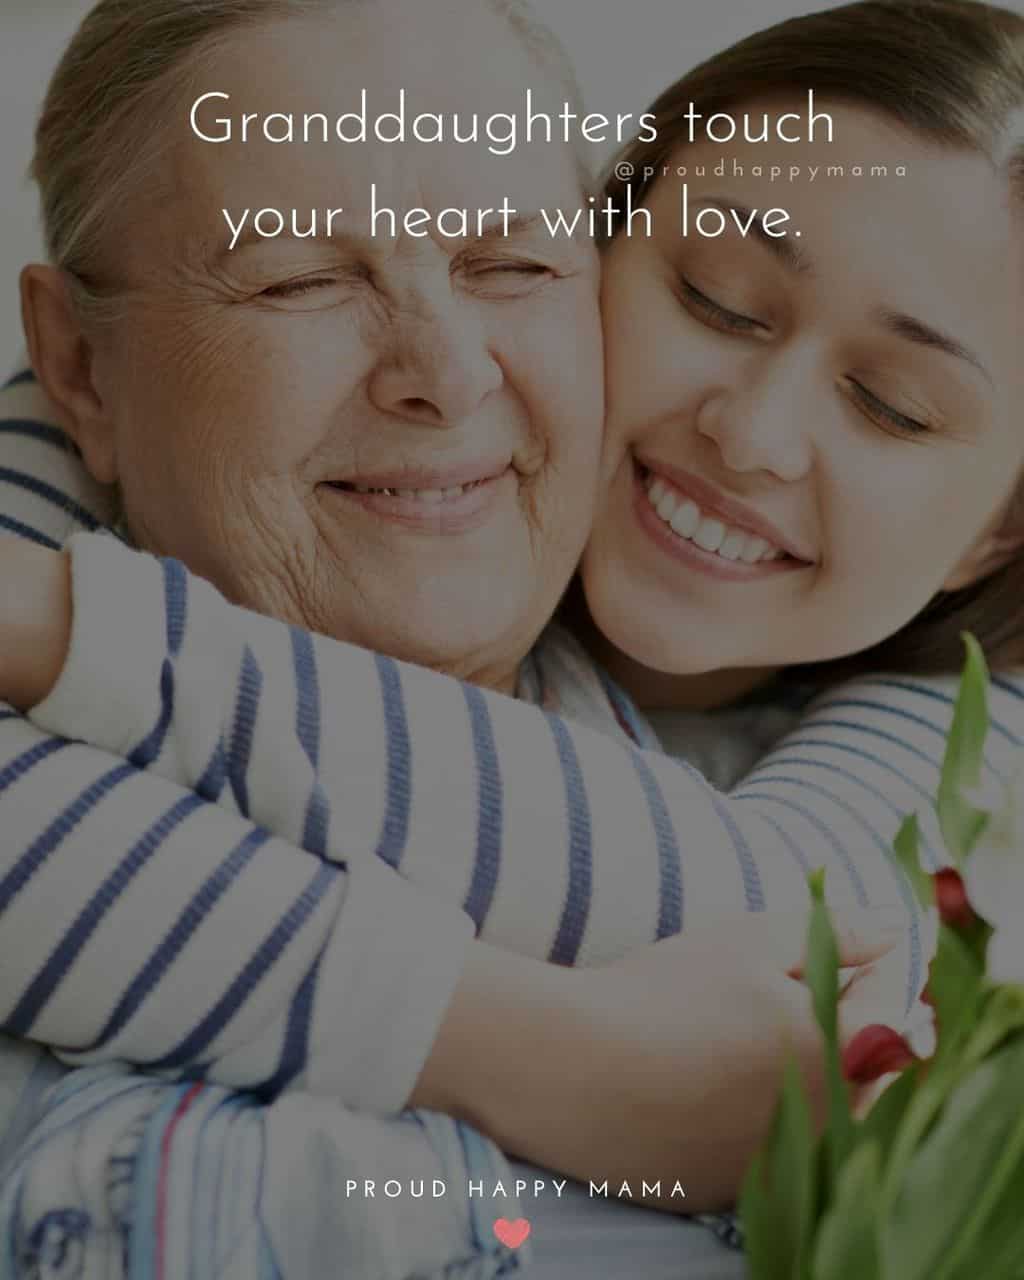 Granddaughter Quotes - Granddaughters touch your heart with love.